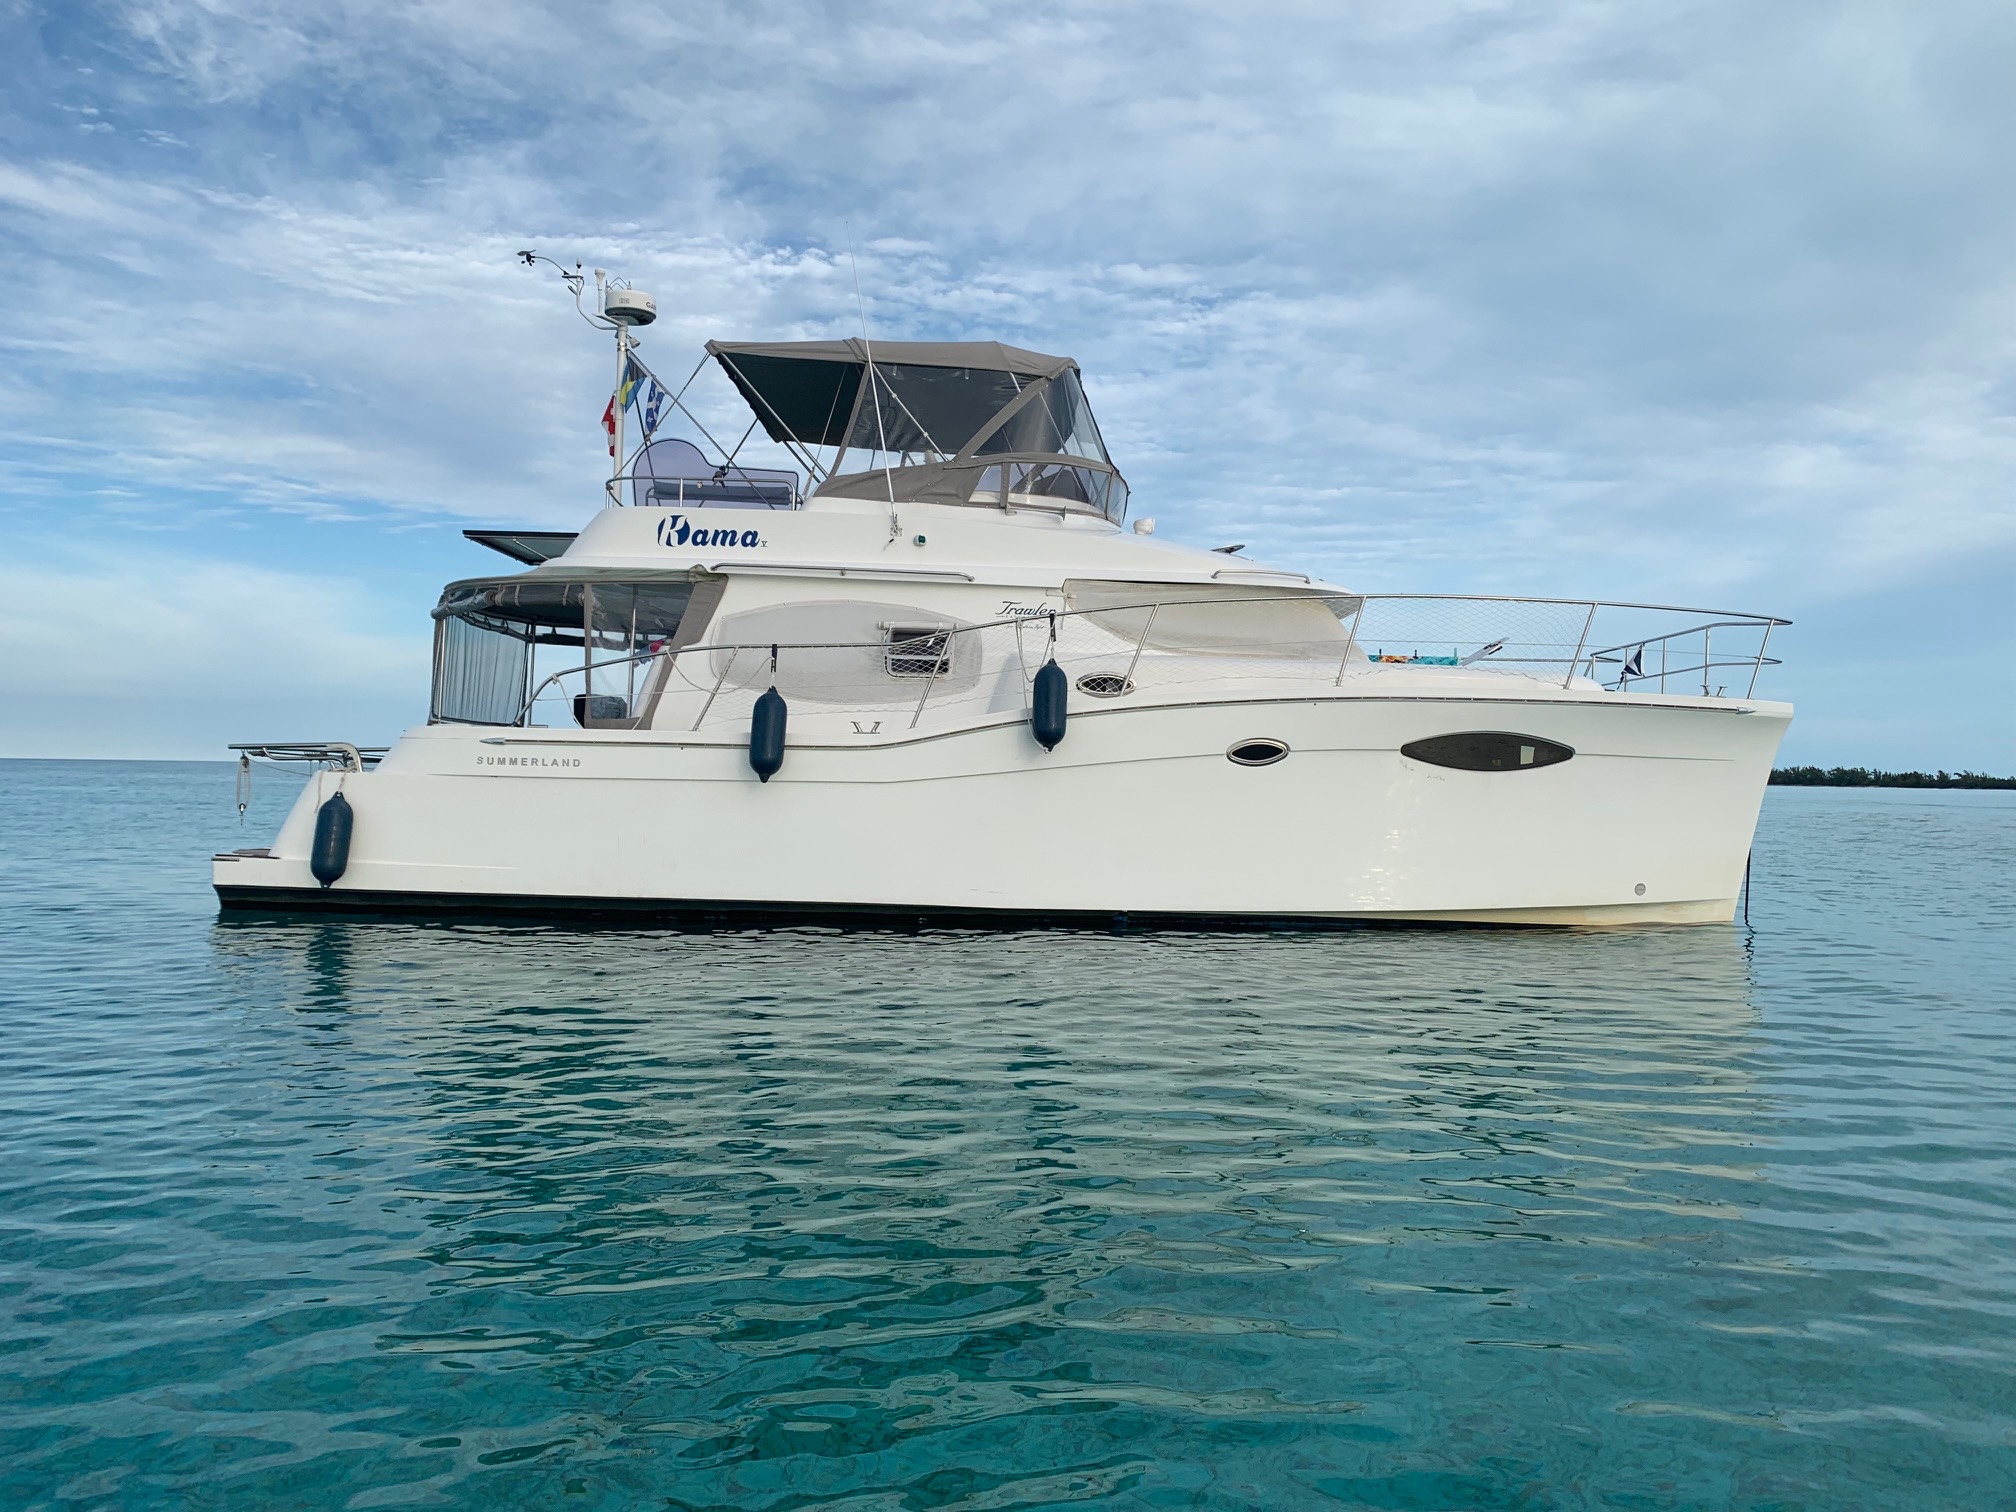 Used Power Catamaran for Sale 2010 Summerland 40 Additional Information